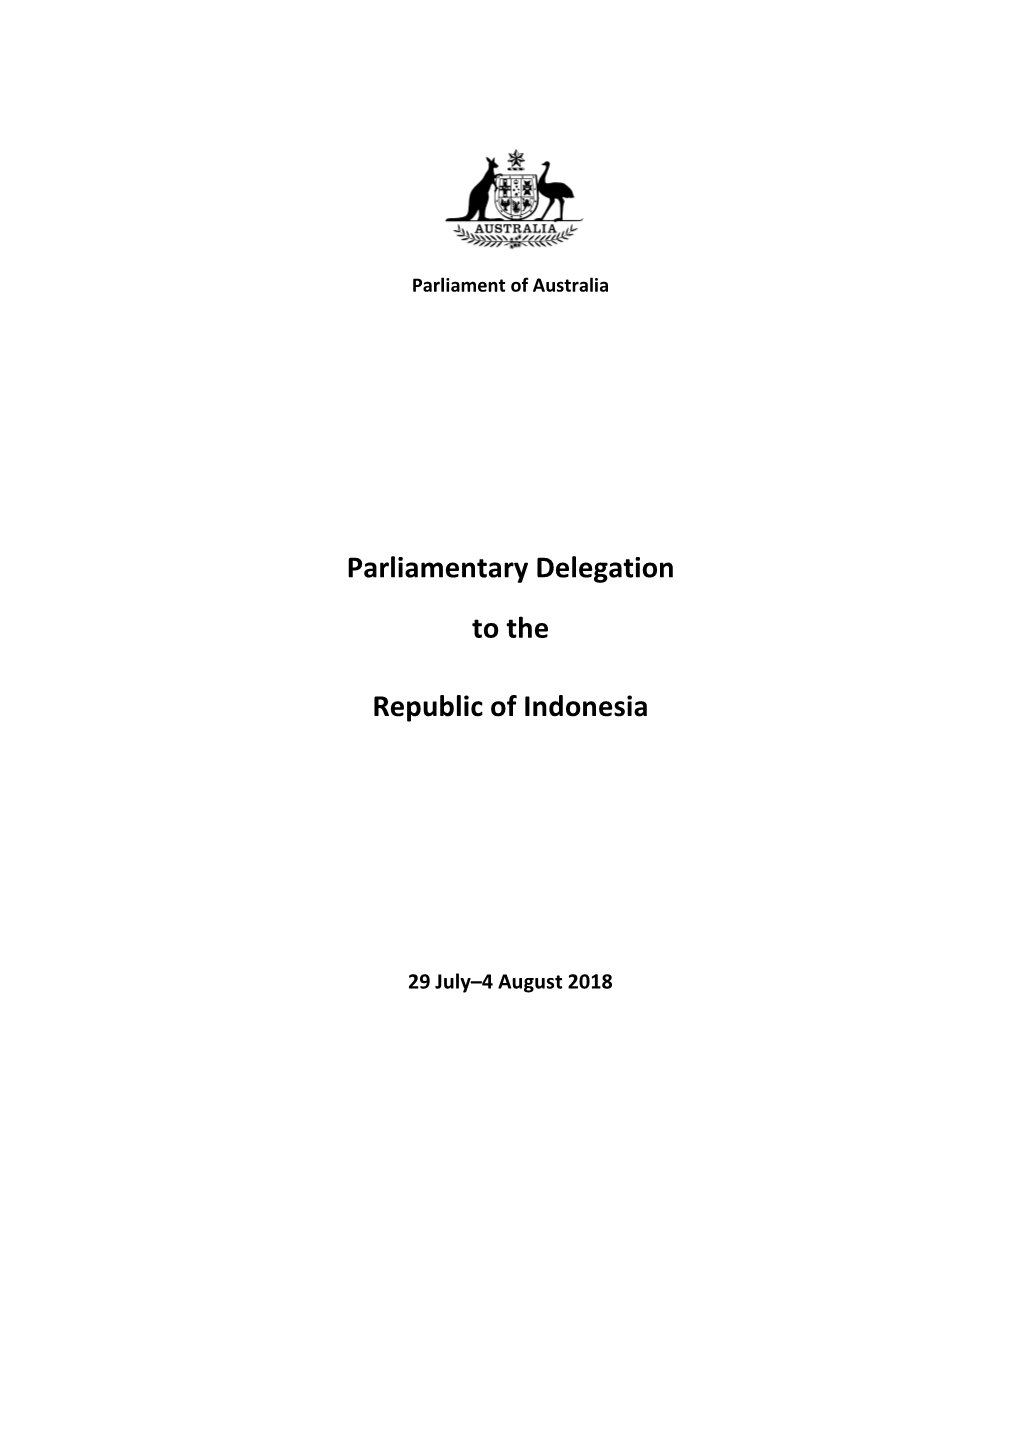 Parliamentary Delegation to the Republic of Indonesia